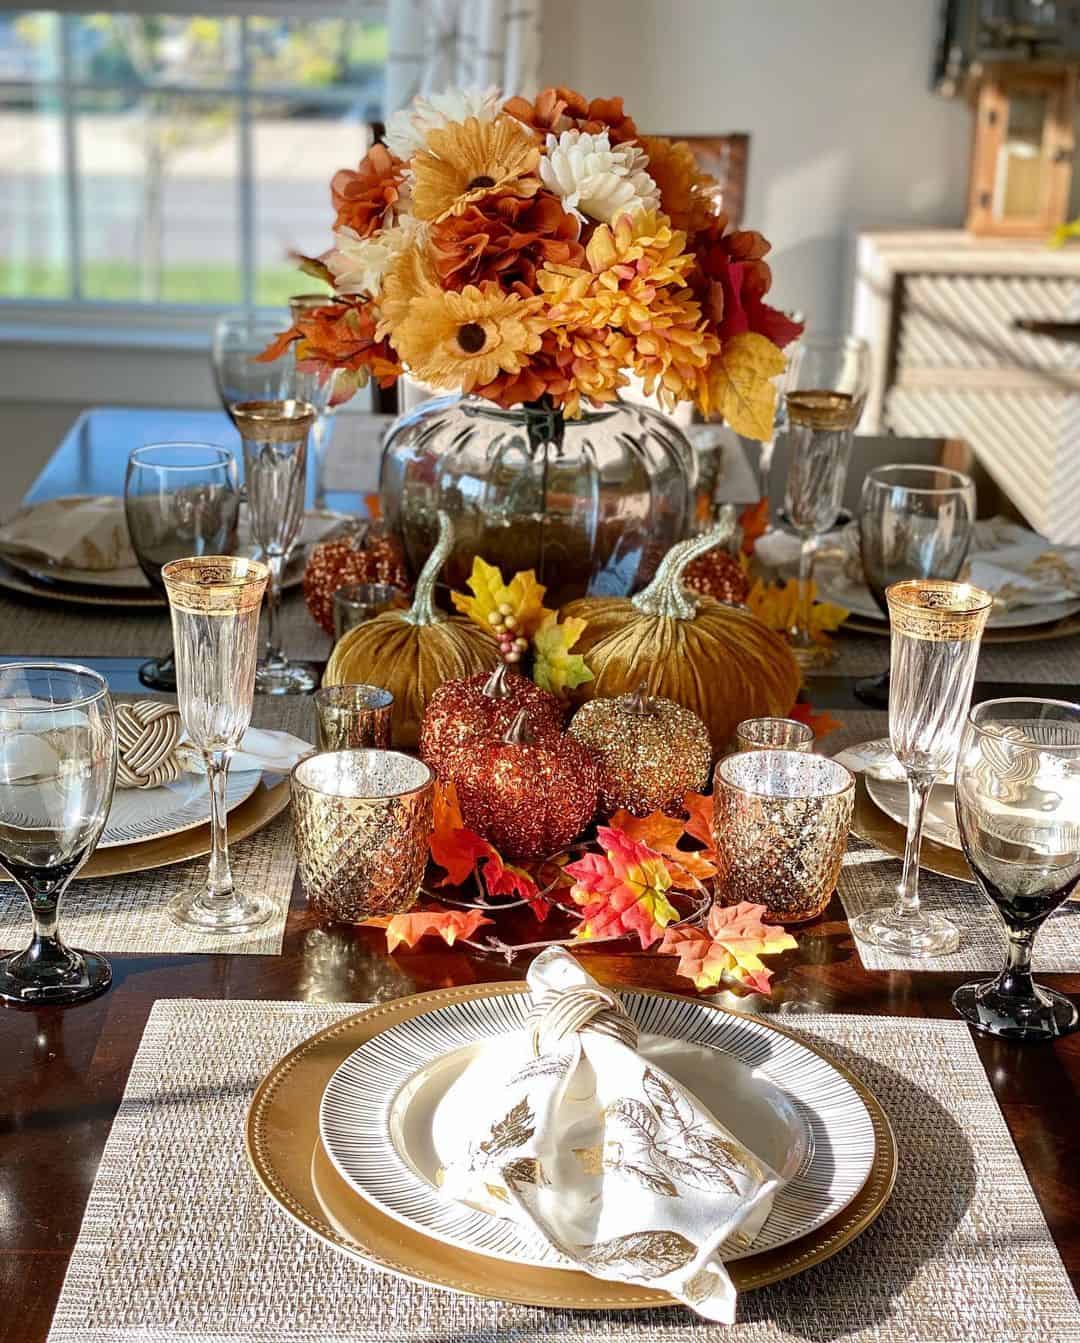 Thanksgiving Table Décor With Glamorous Gourds and Flowers - Soul & Lane